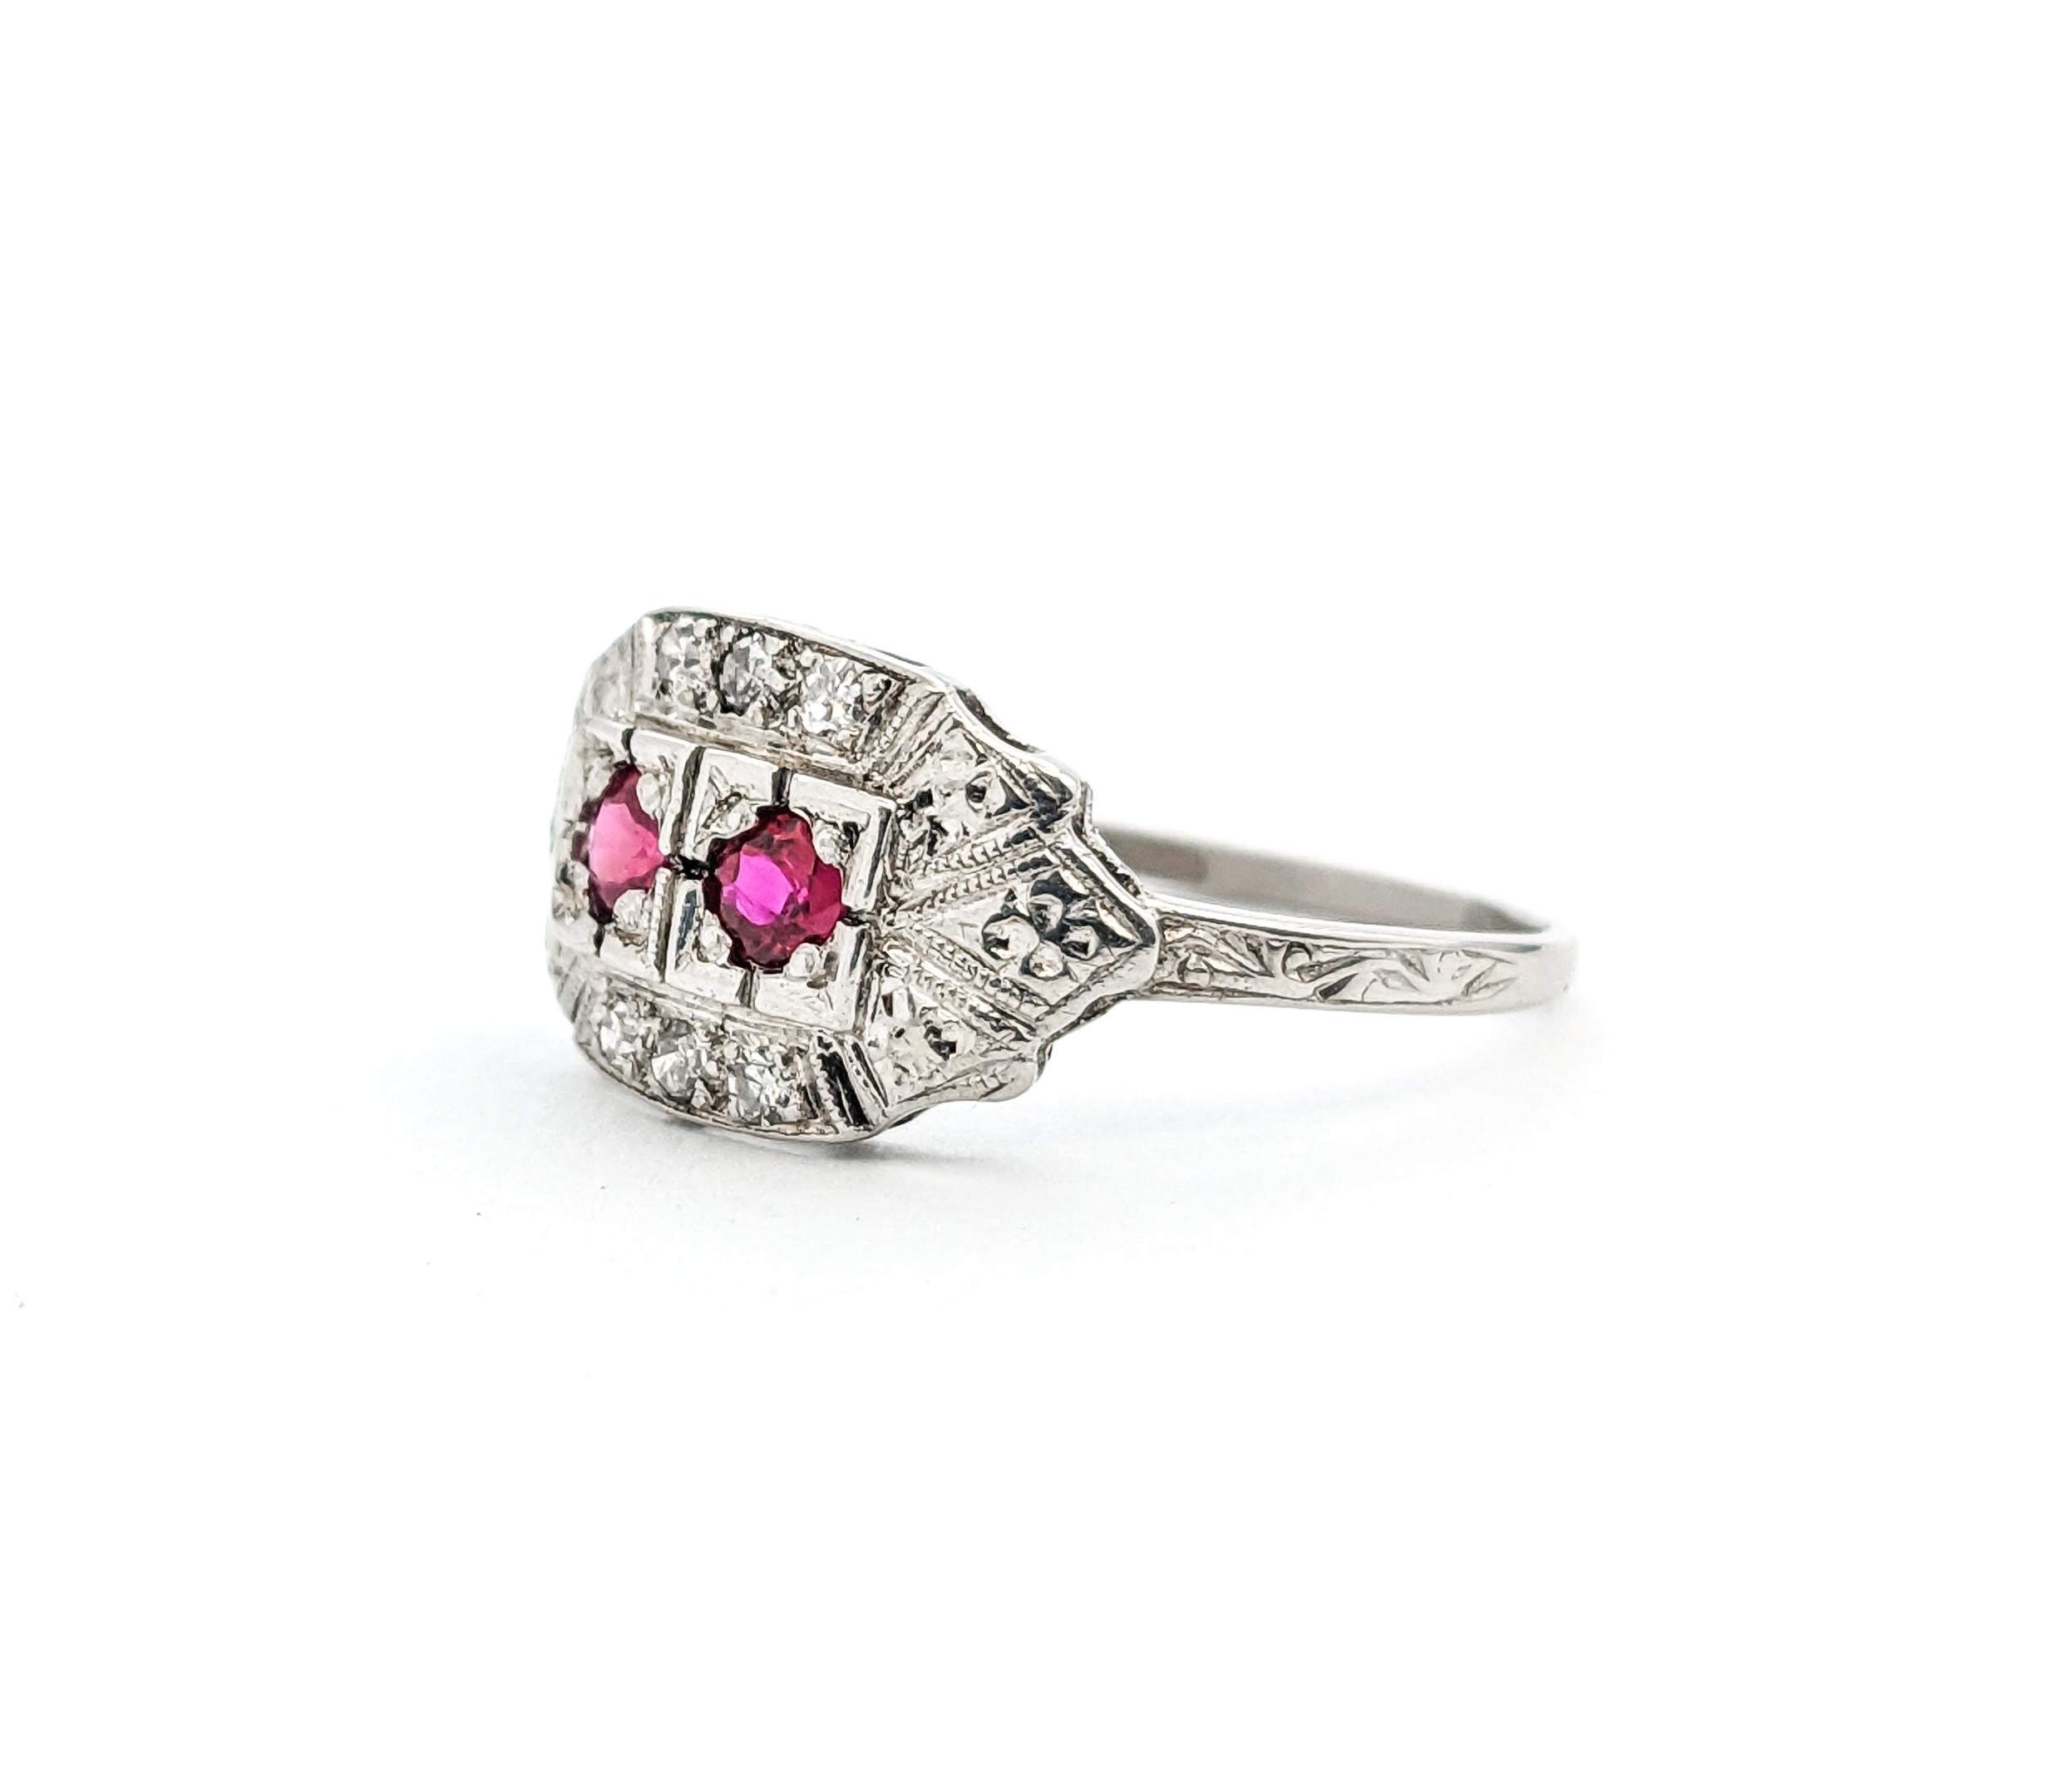 Rubies & Diamond Antique Ring In Platinum In Excellent Condition For Sale In Bloomington, MN